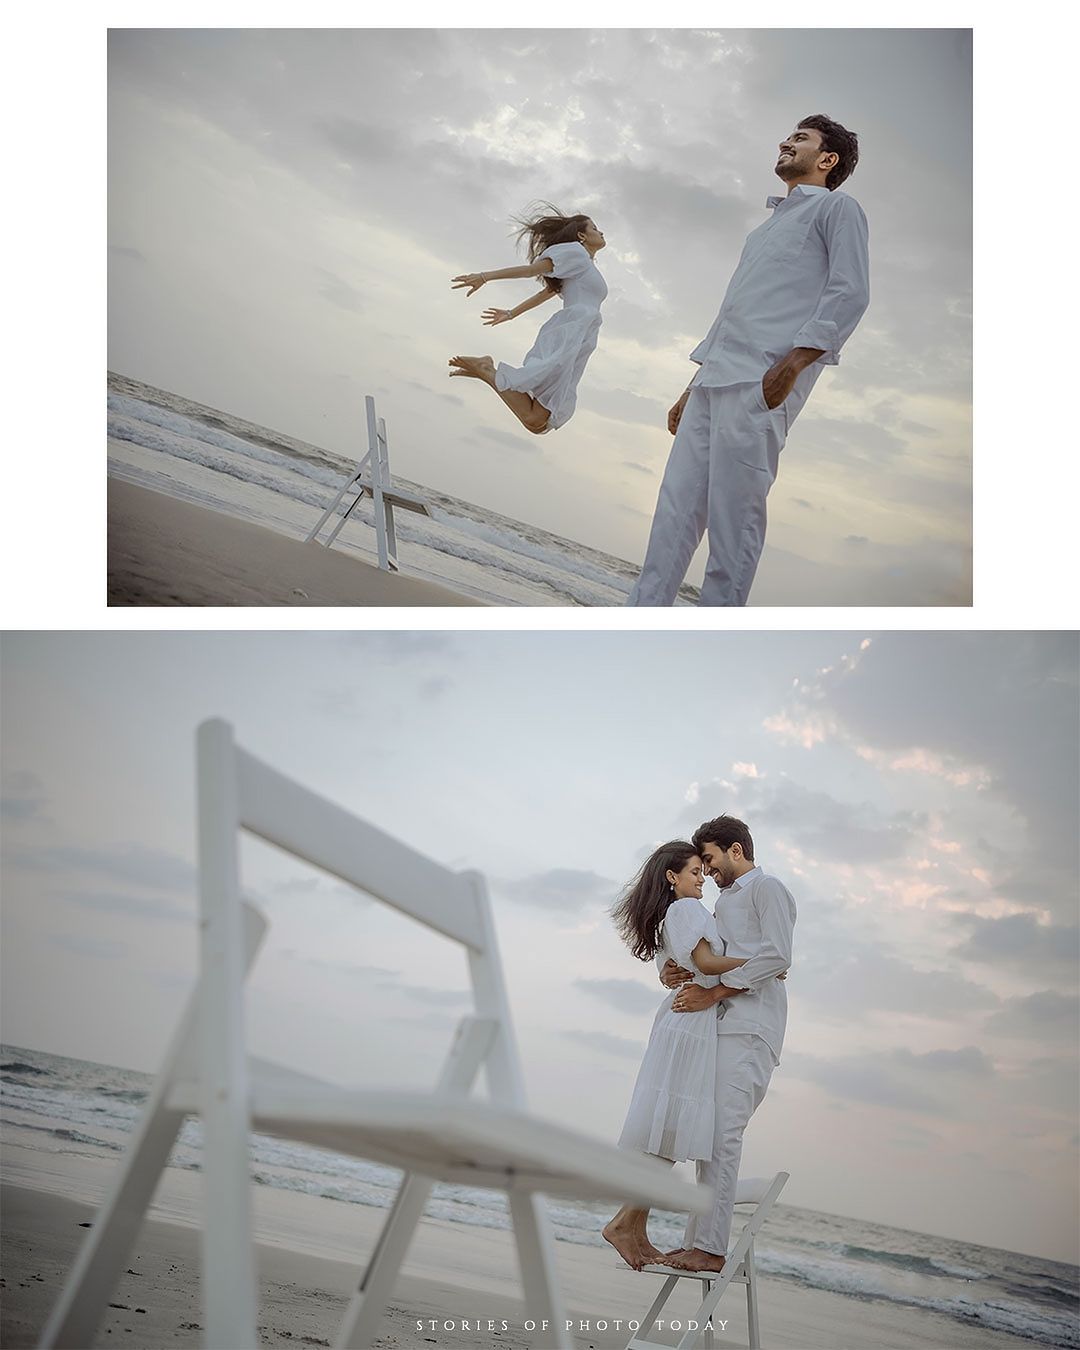 Enchanting Pre-Wedding Photoshoots in Kochi: Capturing Love Stories with PhotoToday Photography